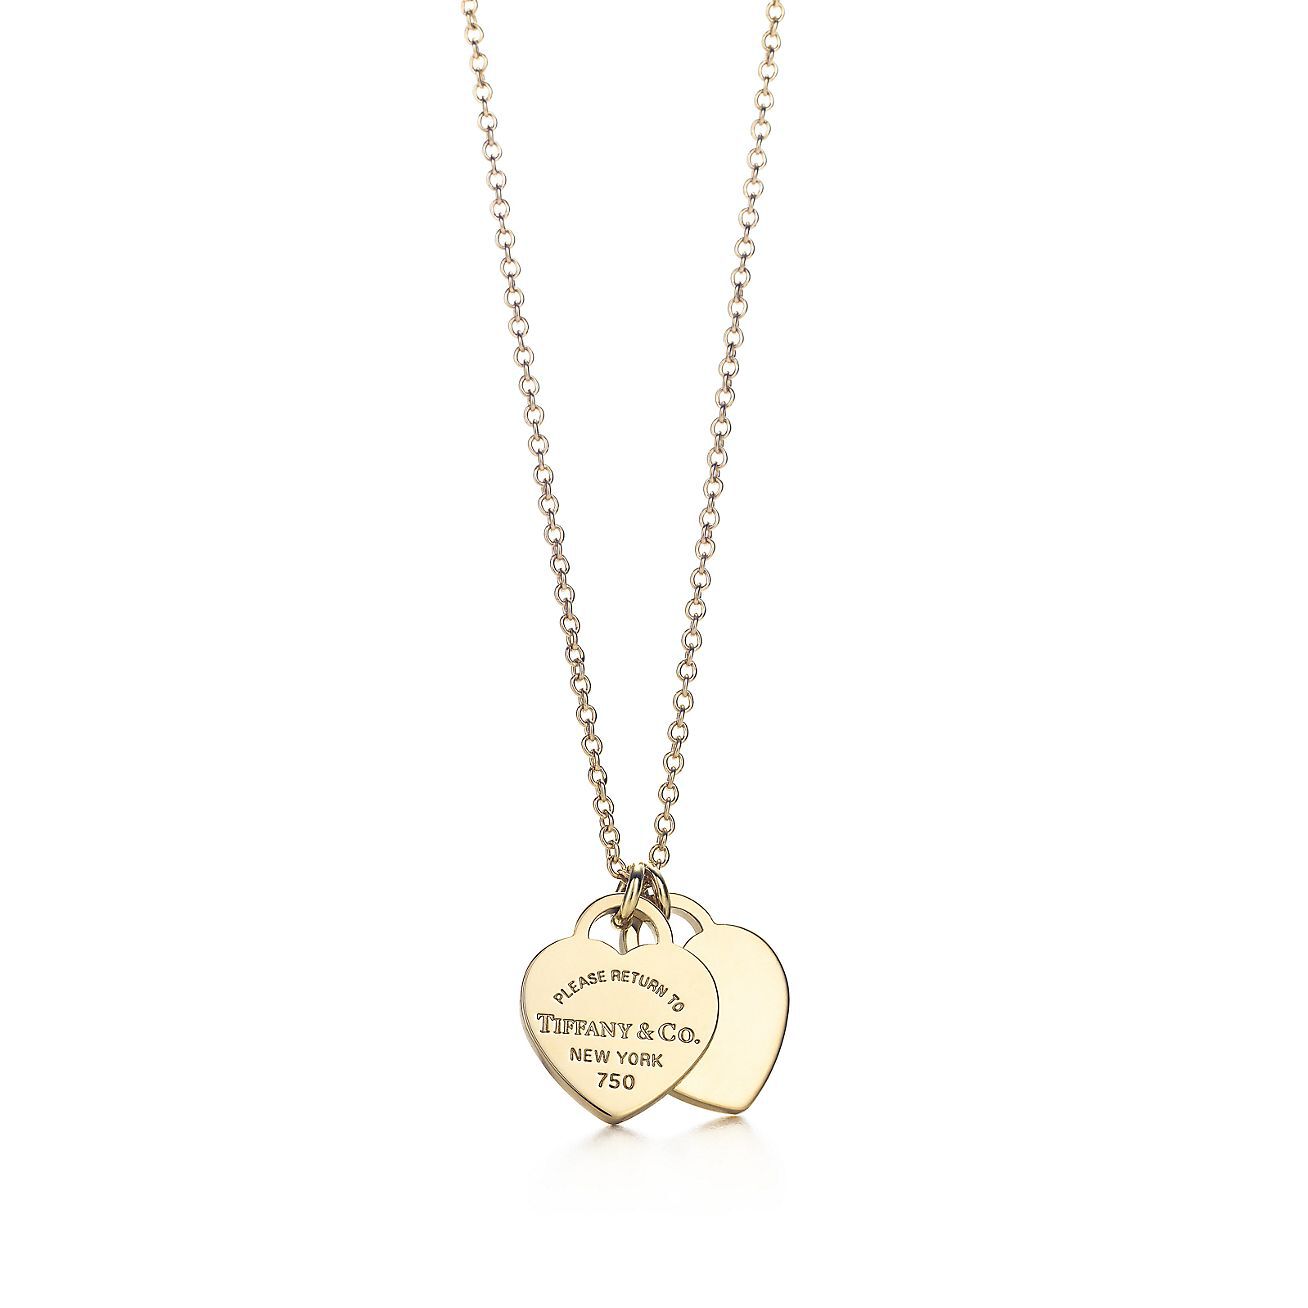 The Best Initial Necklaces from A to Z—to Gift Yourself or Others | Vogue